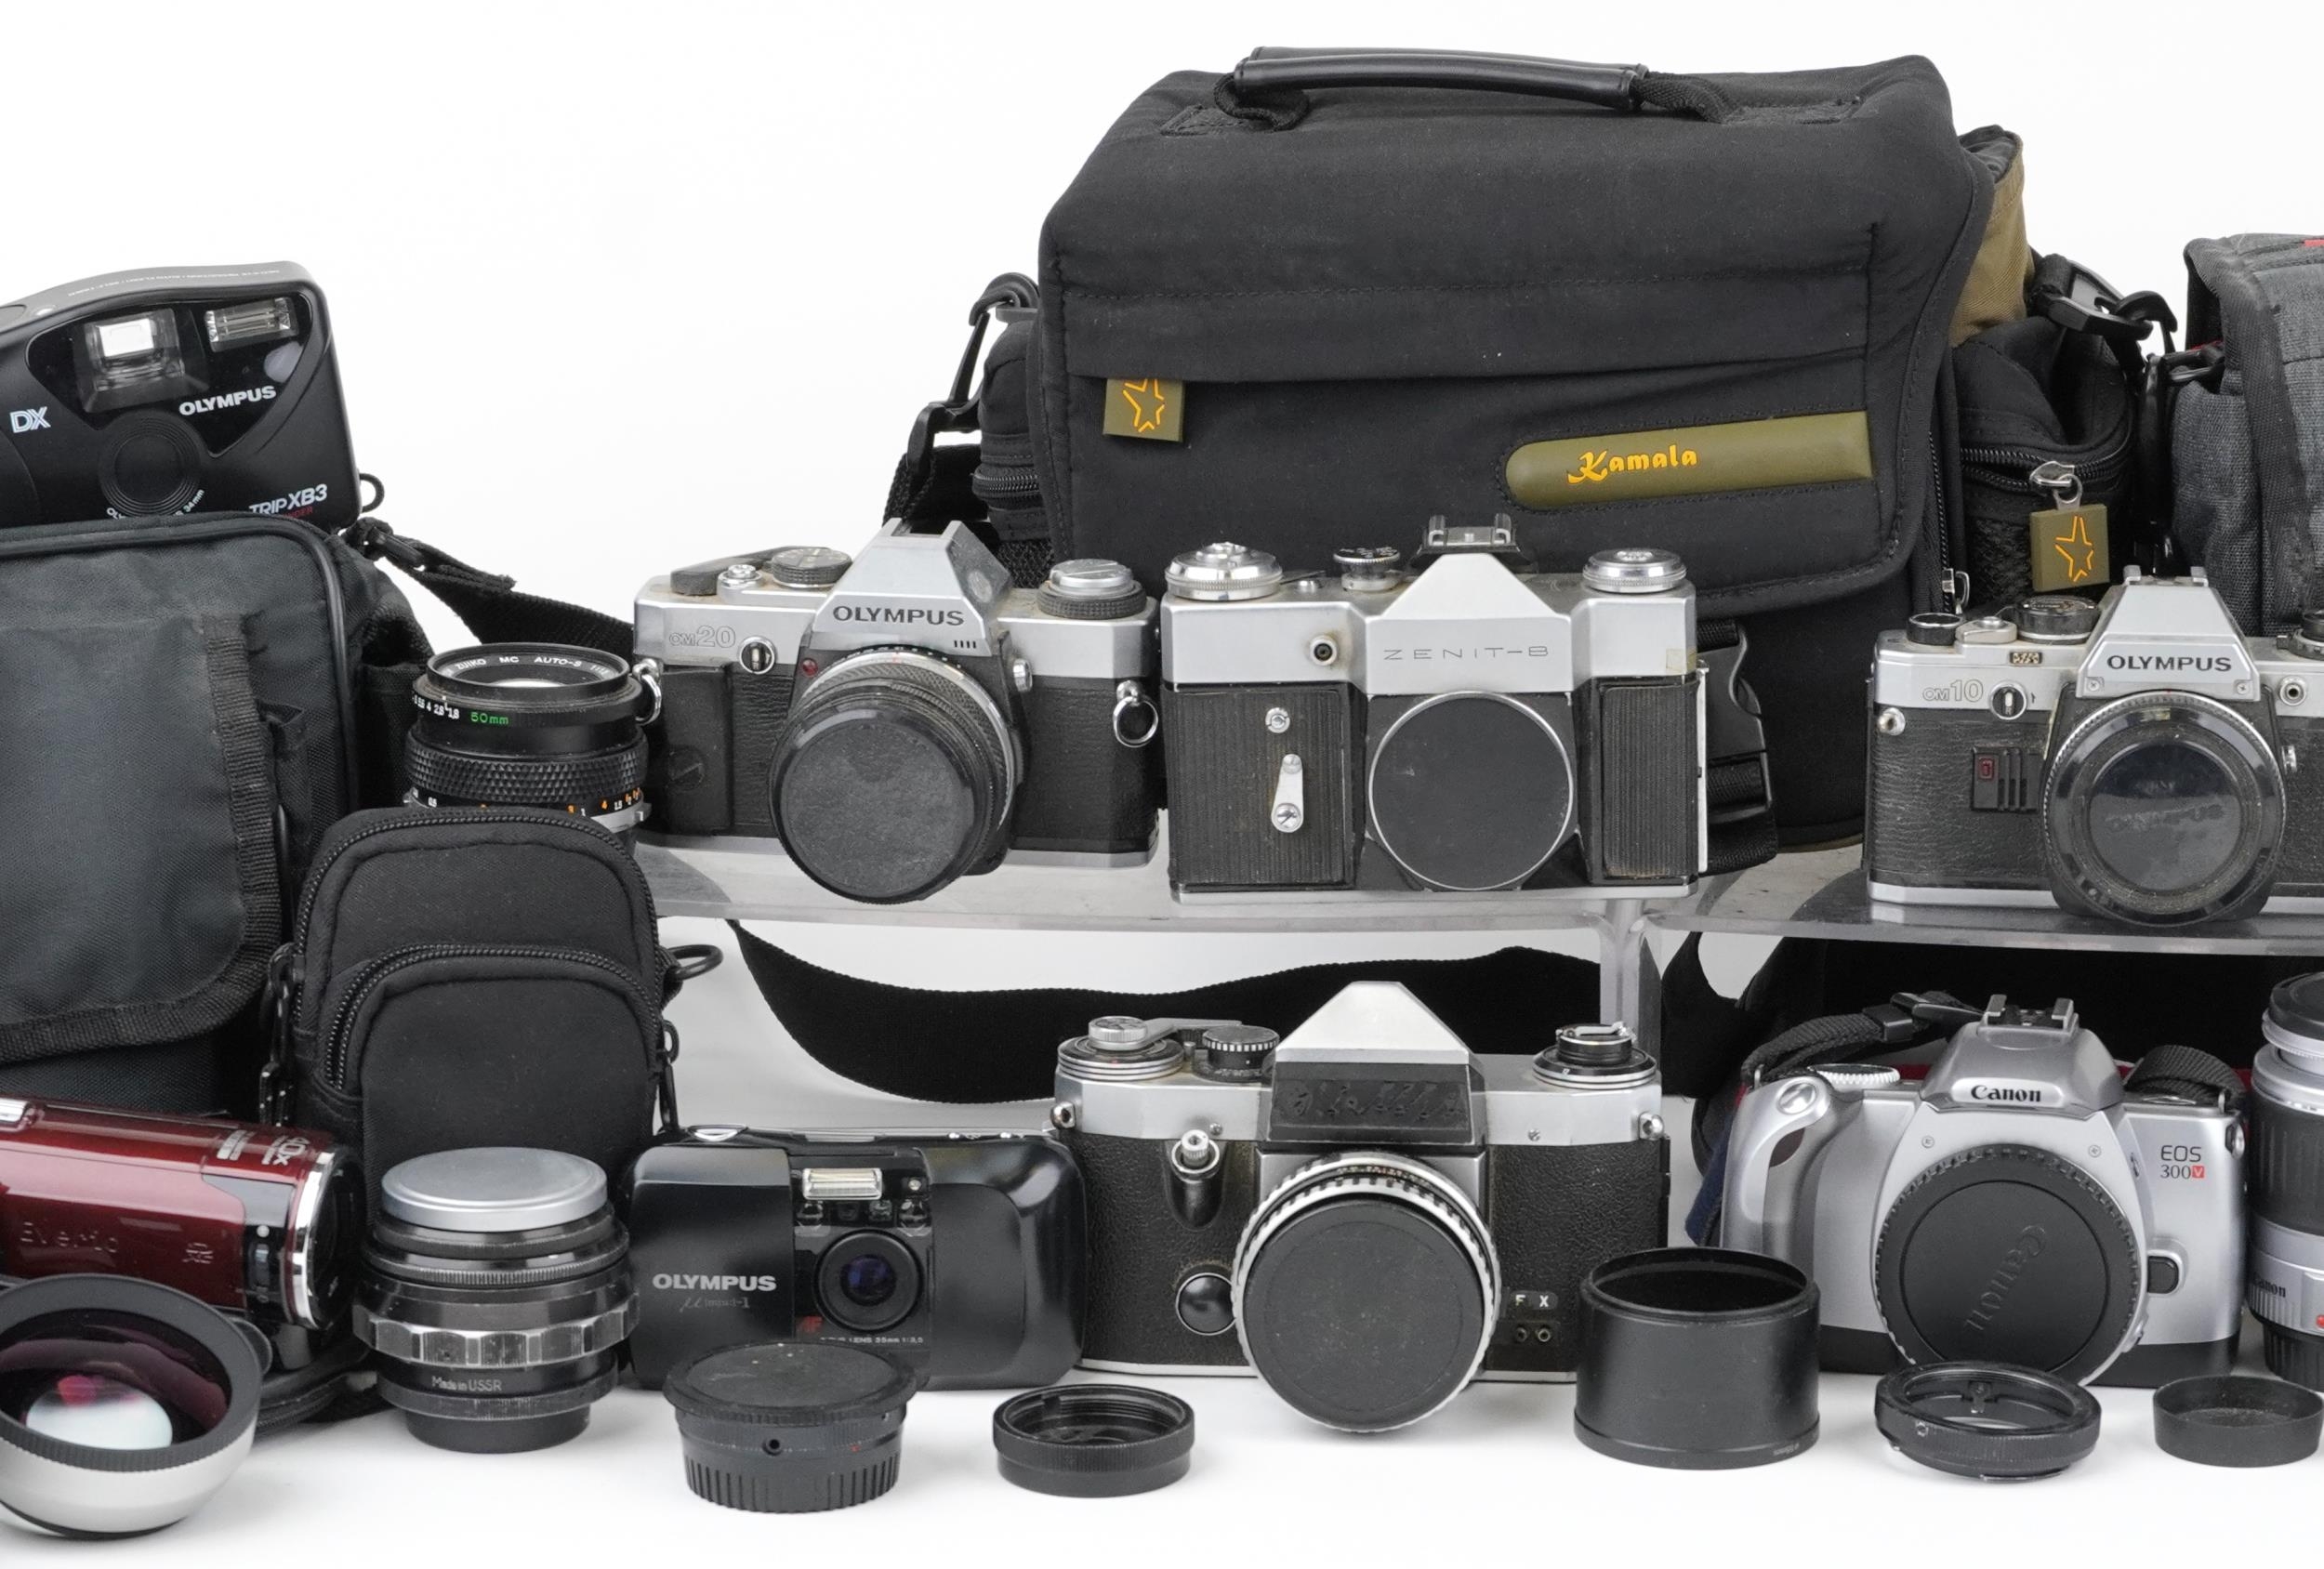 Vintage and later cameras, lenses and accessories including Zenit-B, Canon EOS300V, Olympus, - Image 3 of 4